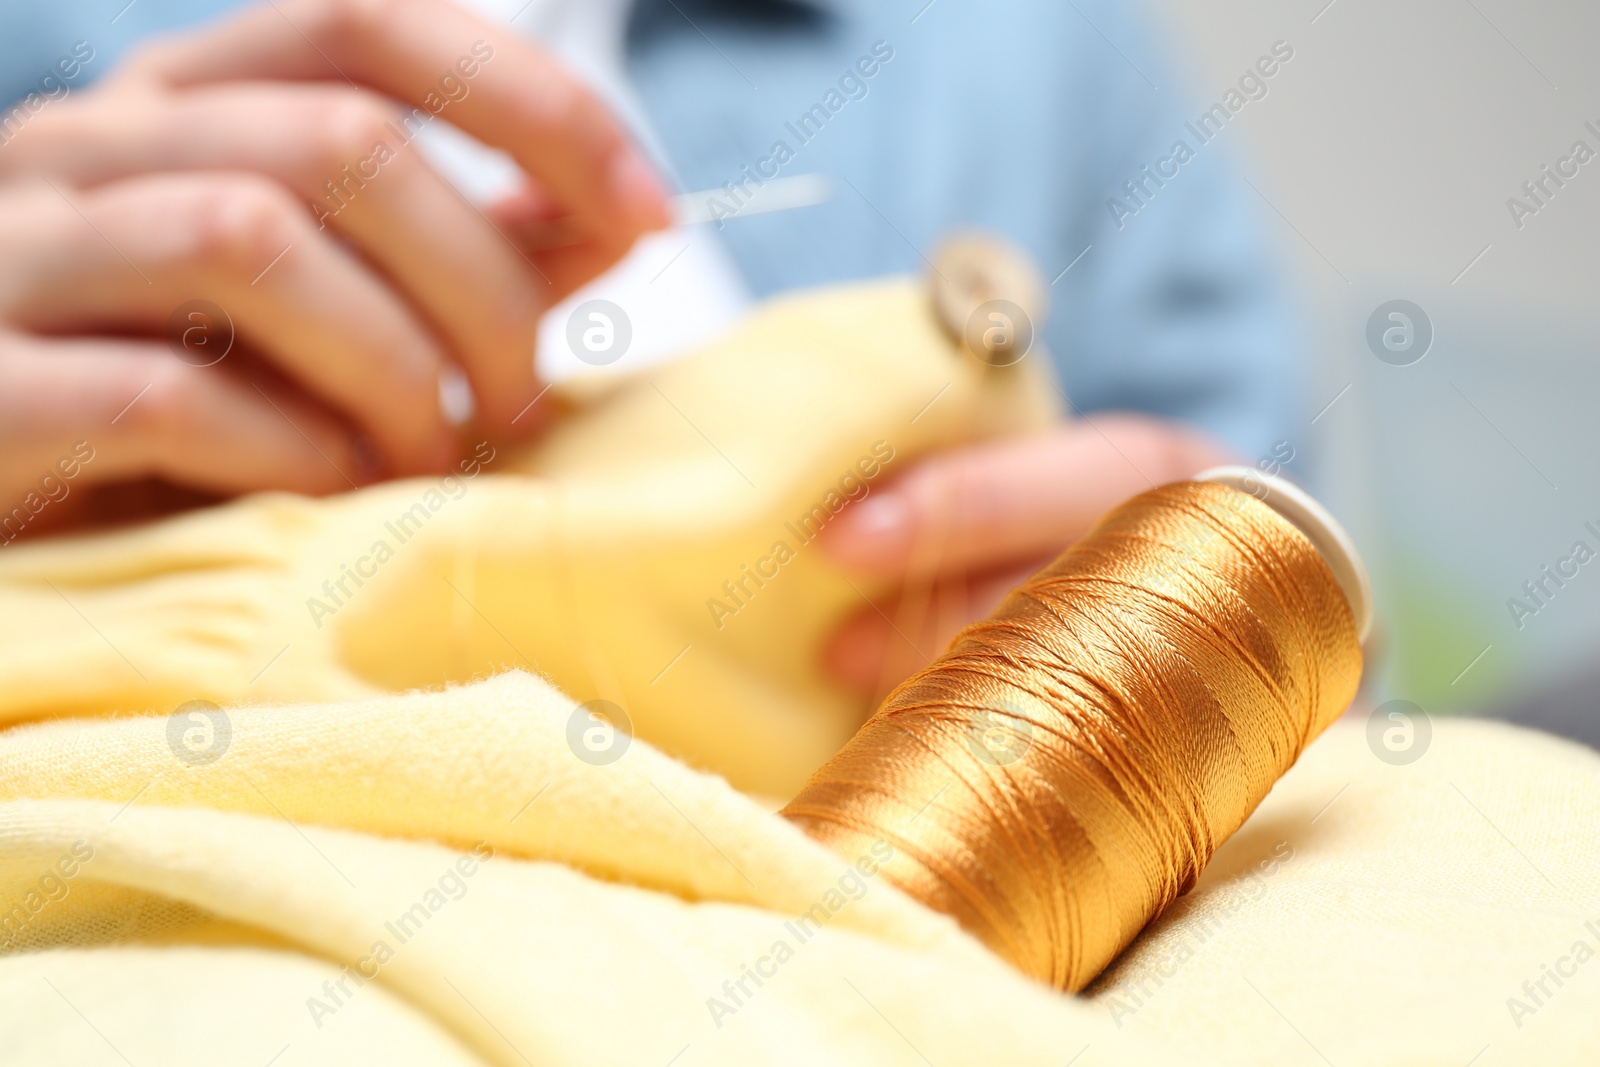 Photo of Woman sewing button onto shirt, focus on thread spool